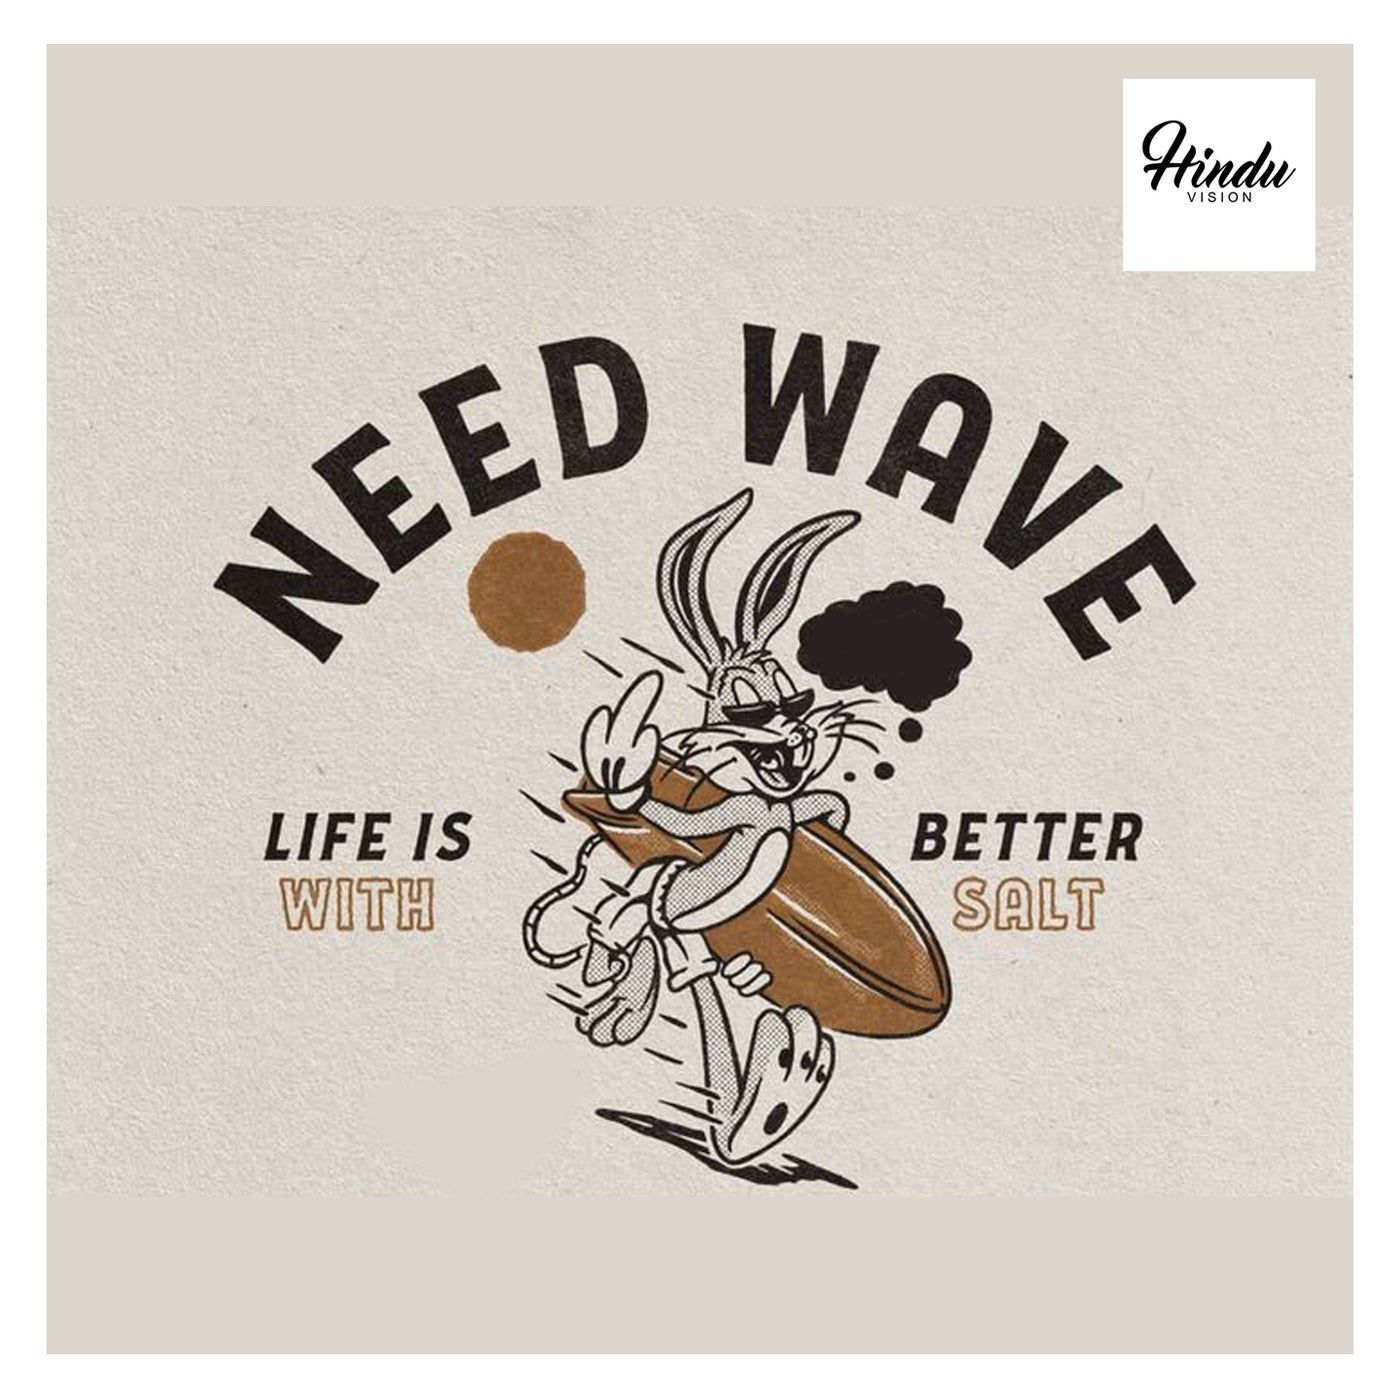 Need Wave (Life Is Better With Salt)